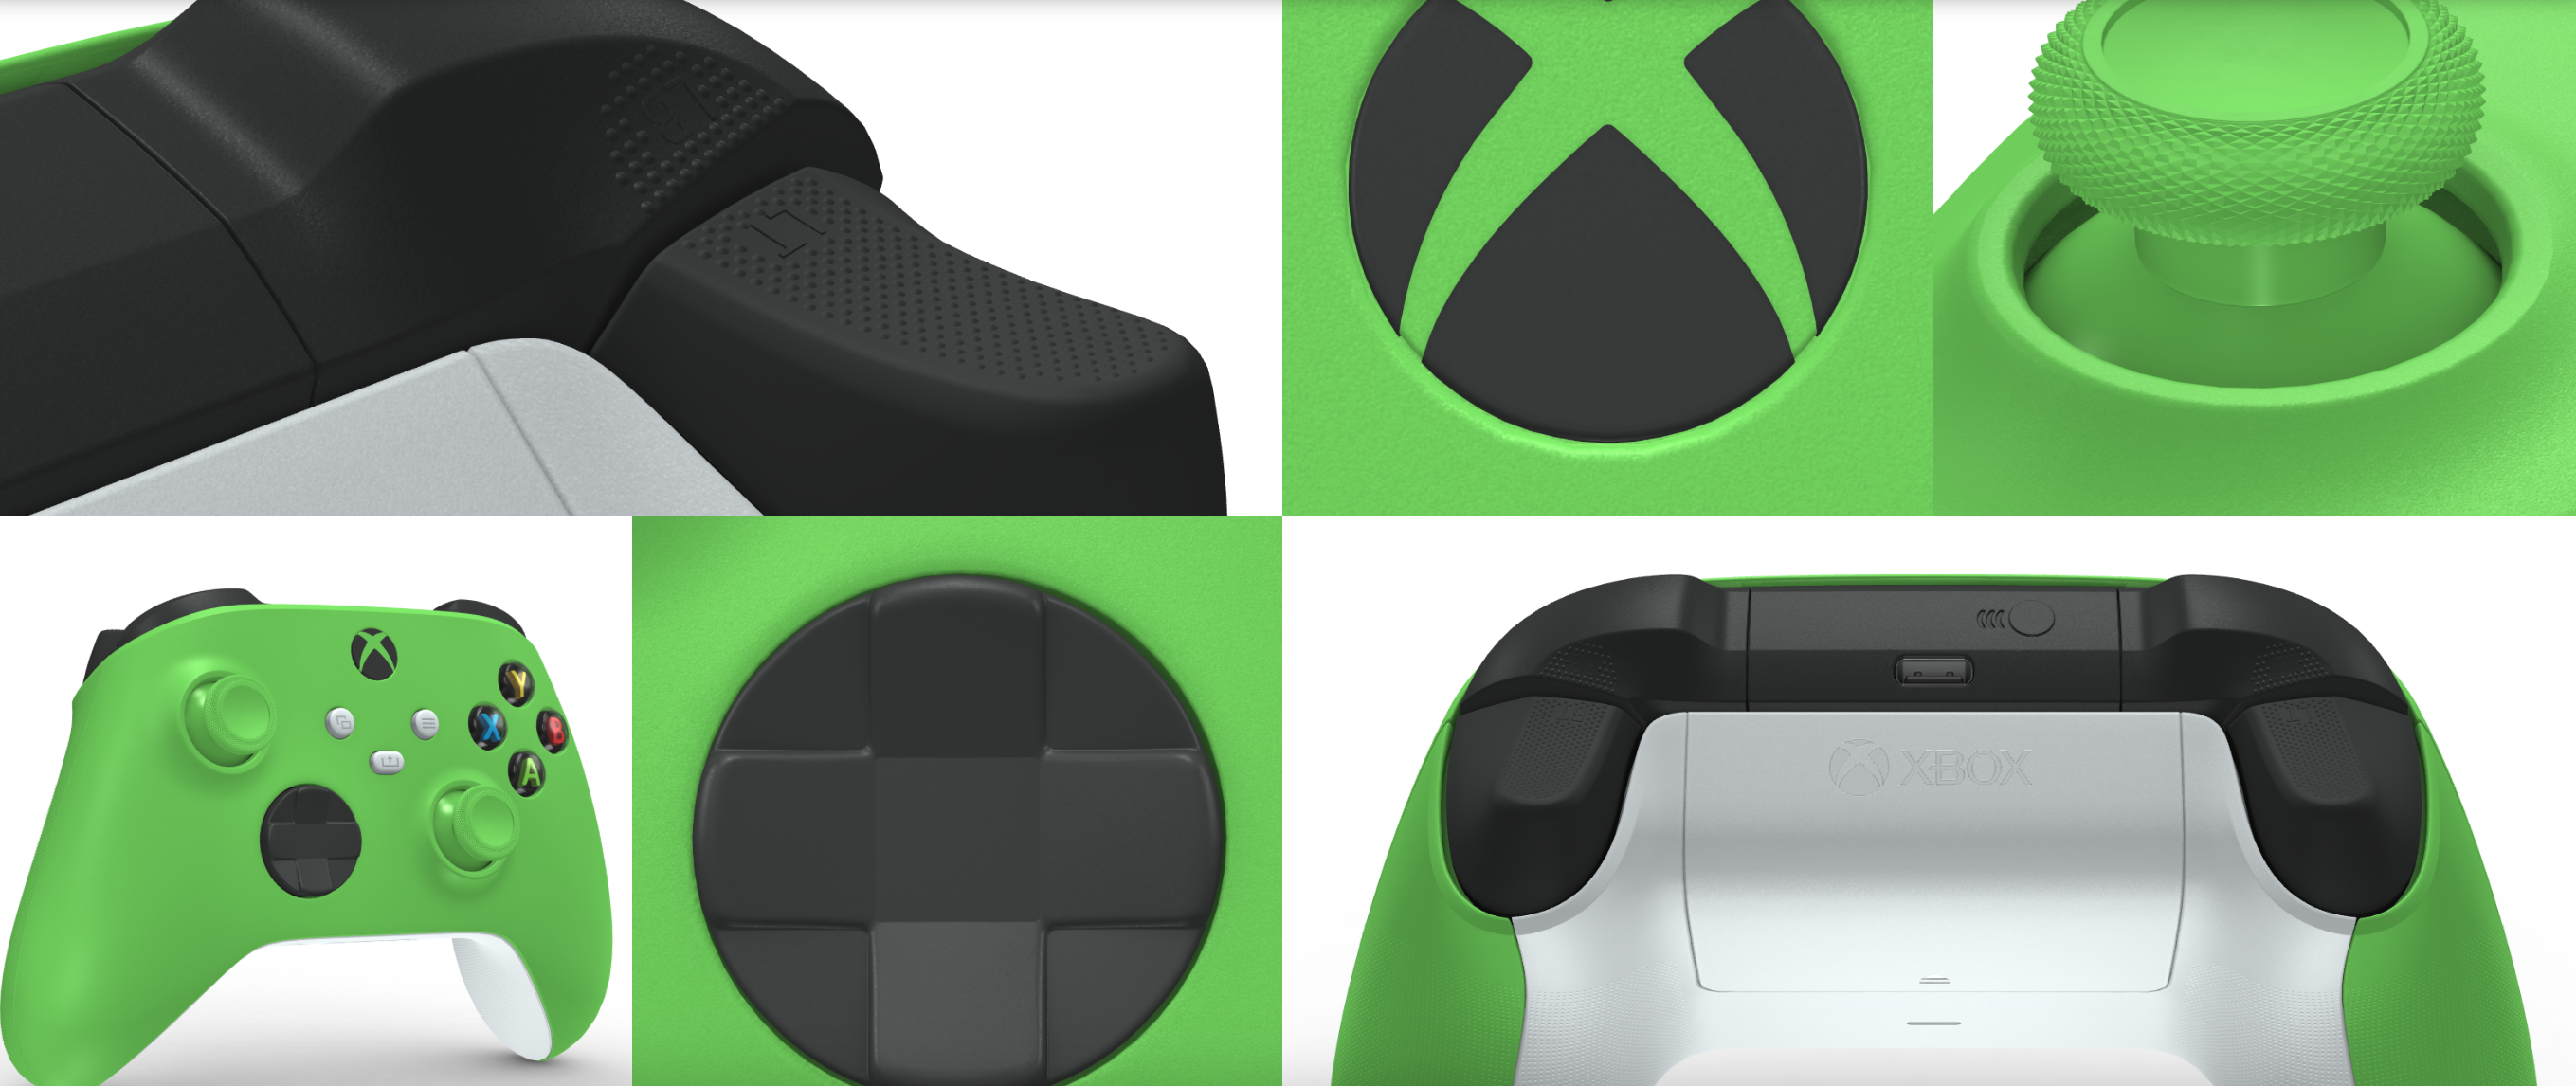 New Green Xbox Controller Leaked, Could Be Out Very Soon - GameSpot